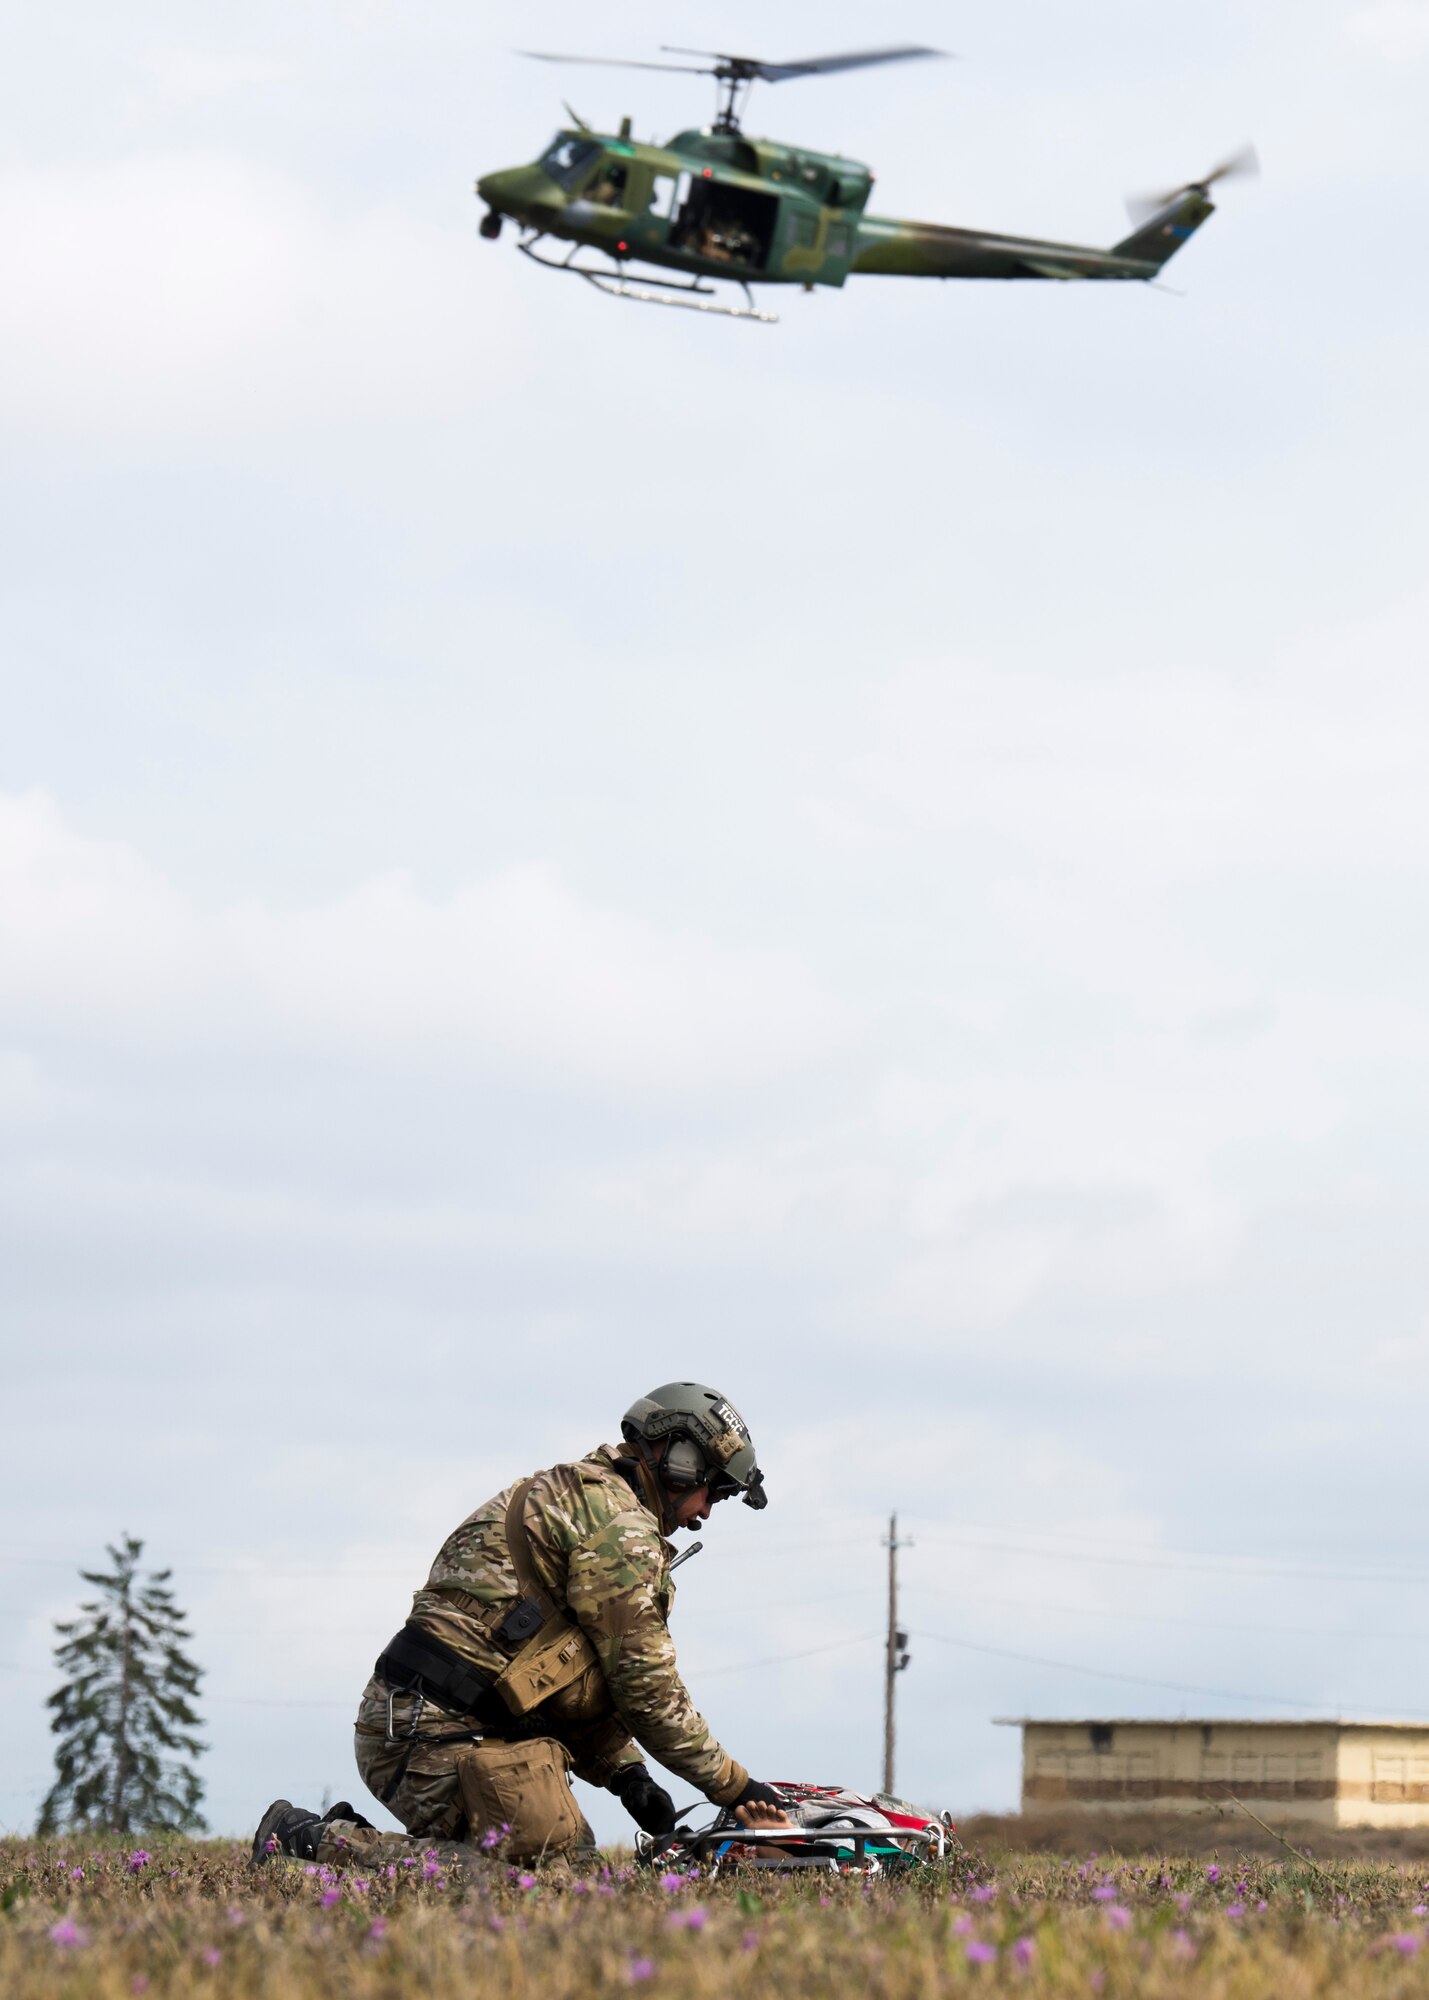 U.S. Air Force Tech. Sgt. James Pennington, 336th Training Group independent medical technician, performs a rescue demonstration prior to the commemoration ceremony of the 36th Rescue Squadron reaching 700 saves at Fairchild Air Force Base, Washington, Sept. 20, 2019. The 36th RQS began its rescue operations in 1971, providing support to Survival, Evasion, Resistance and Escape specialists, as well as civilian emergency search and rescue coverage of the Inland Northwest. (U.S. Air Force photo by Airman 1st Class Lawrence Sena)